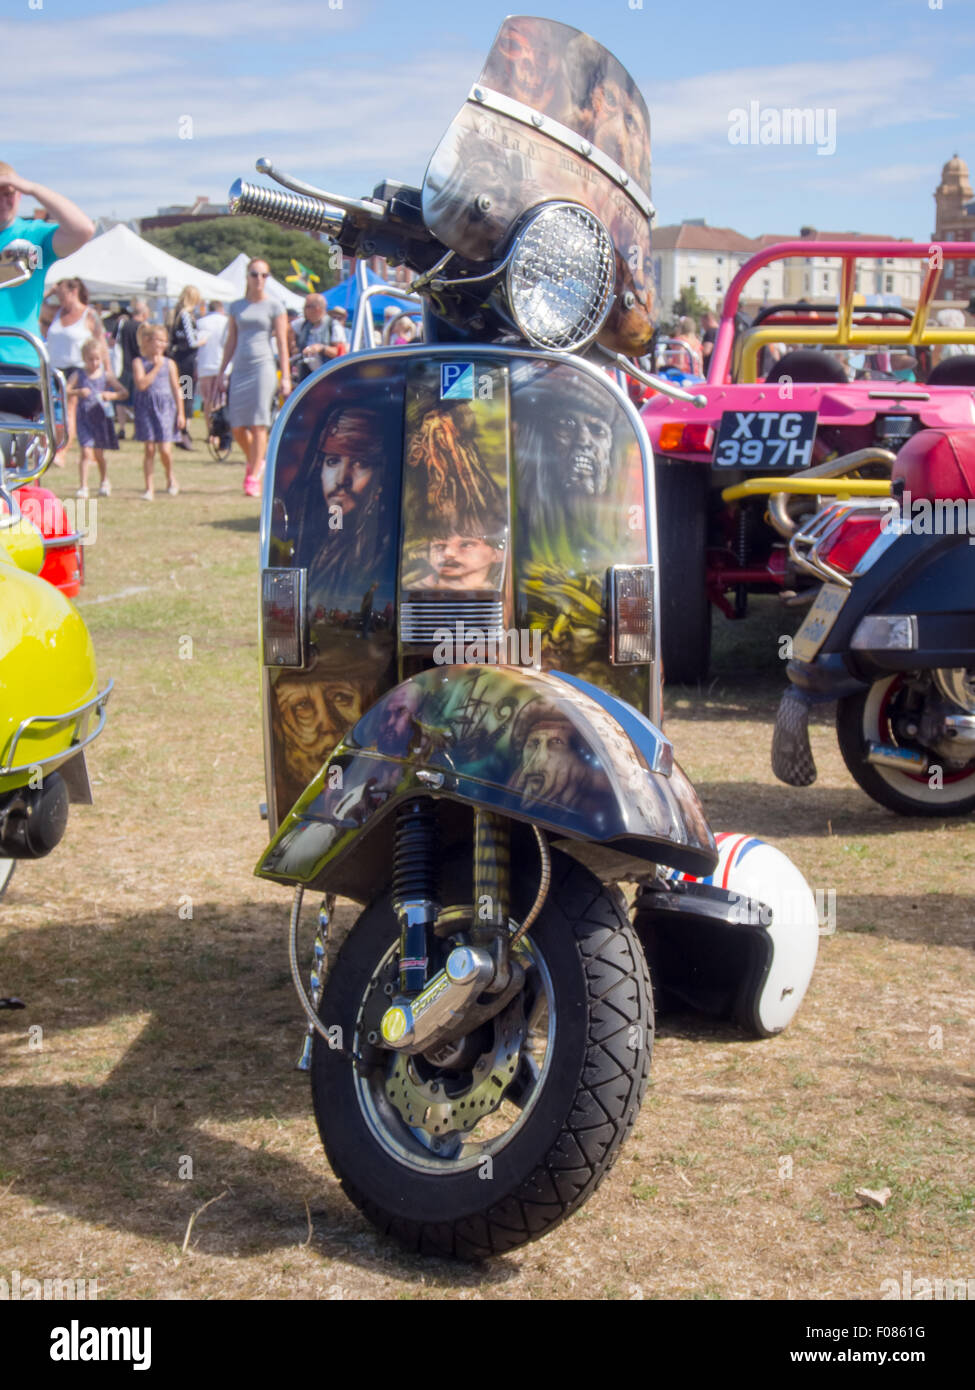 A Customised Vespa scooter with Pirates of the Caribbean art work Stock Photo